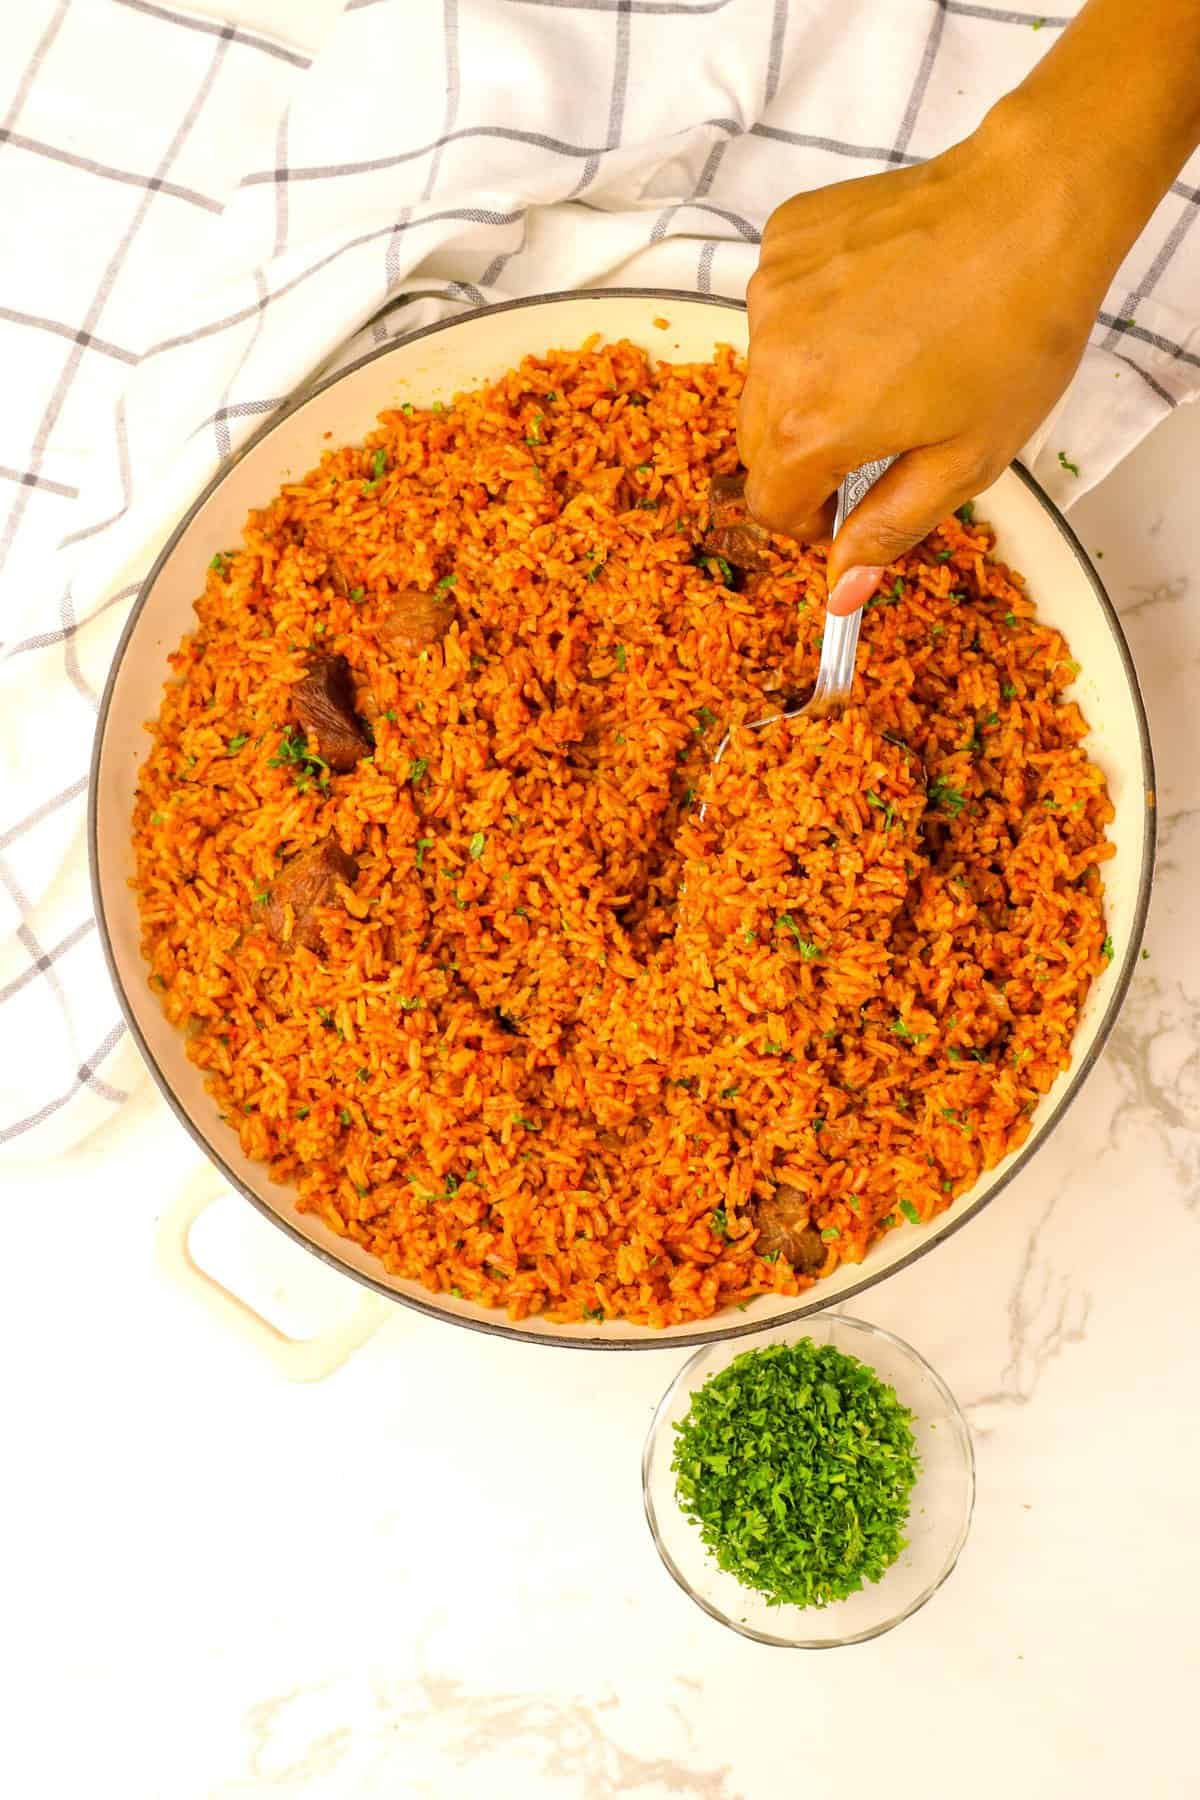 A finished bowl of Ghanaian jollof rice for a hearty side or one-pot meal